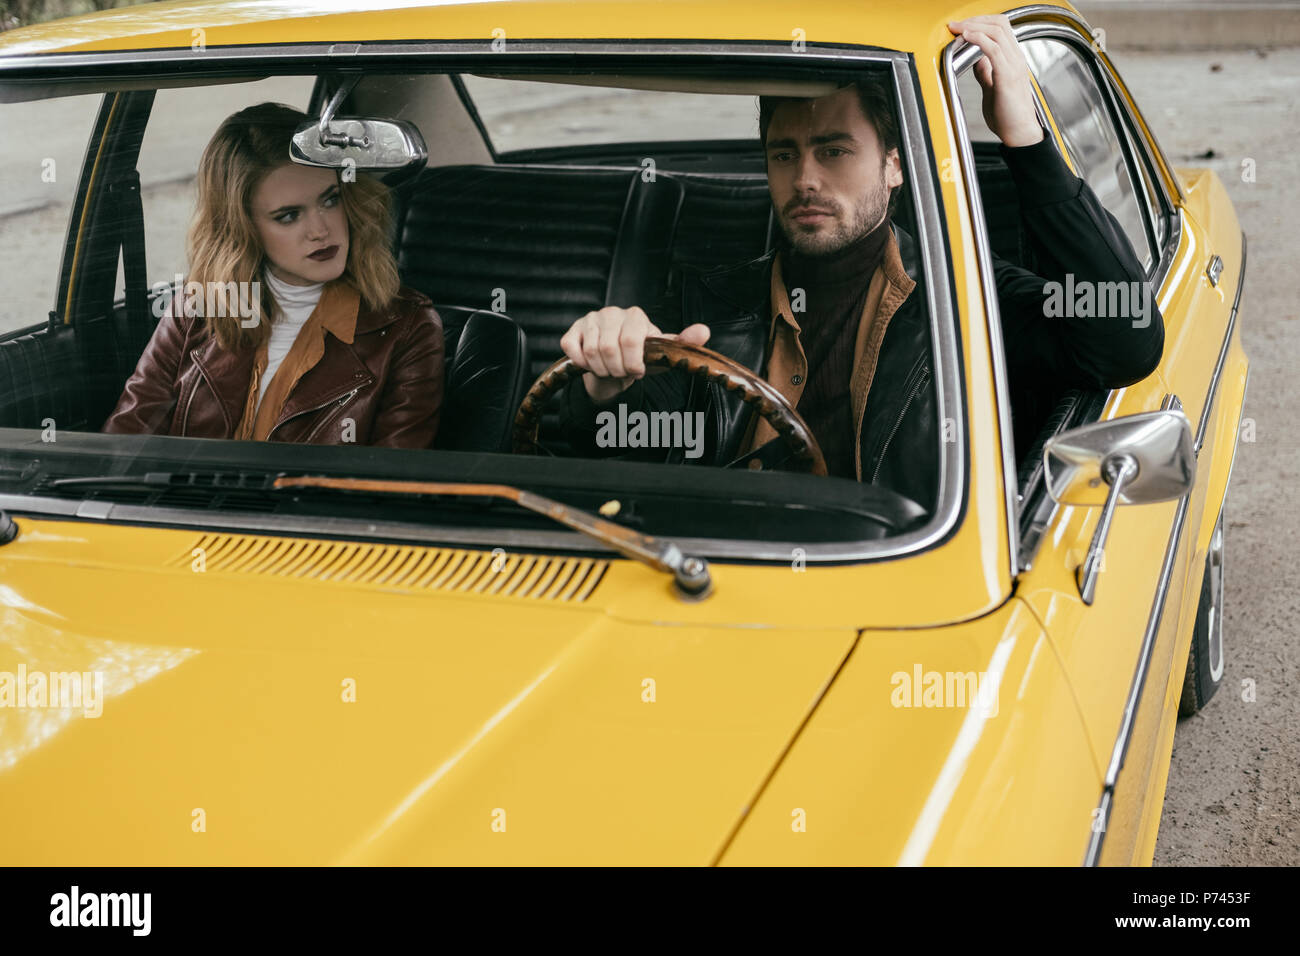 view through the windshield of young couple in leather jackets sitting together in yellow classic car Stock Photo